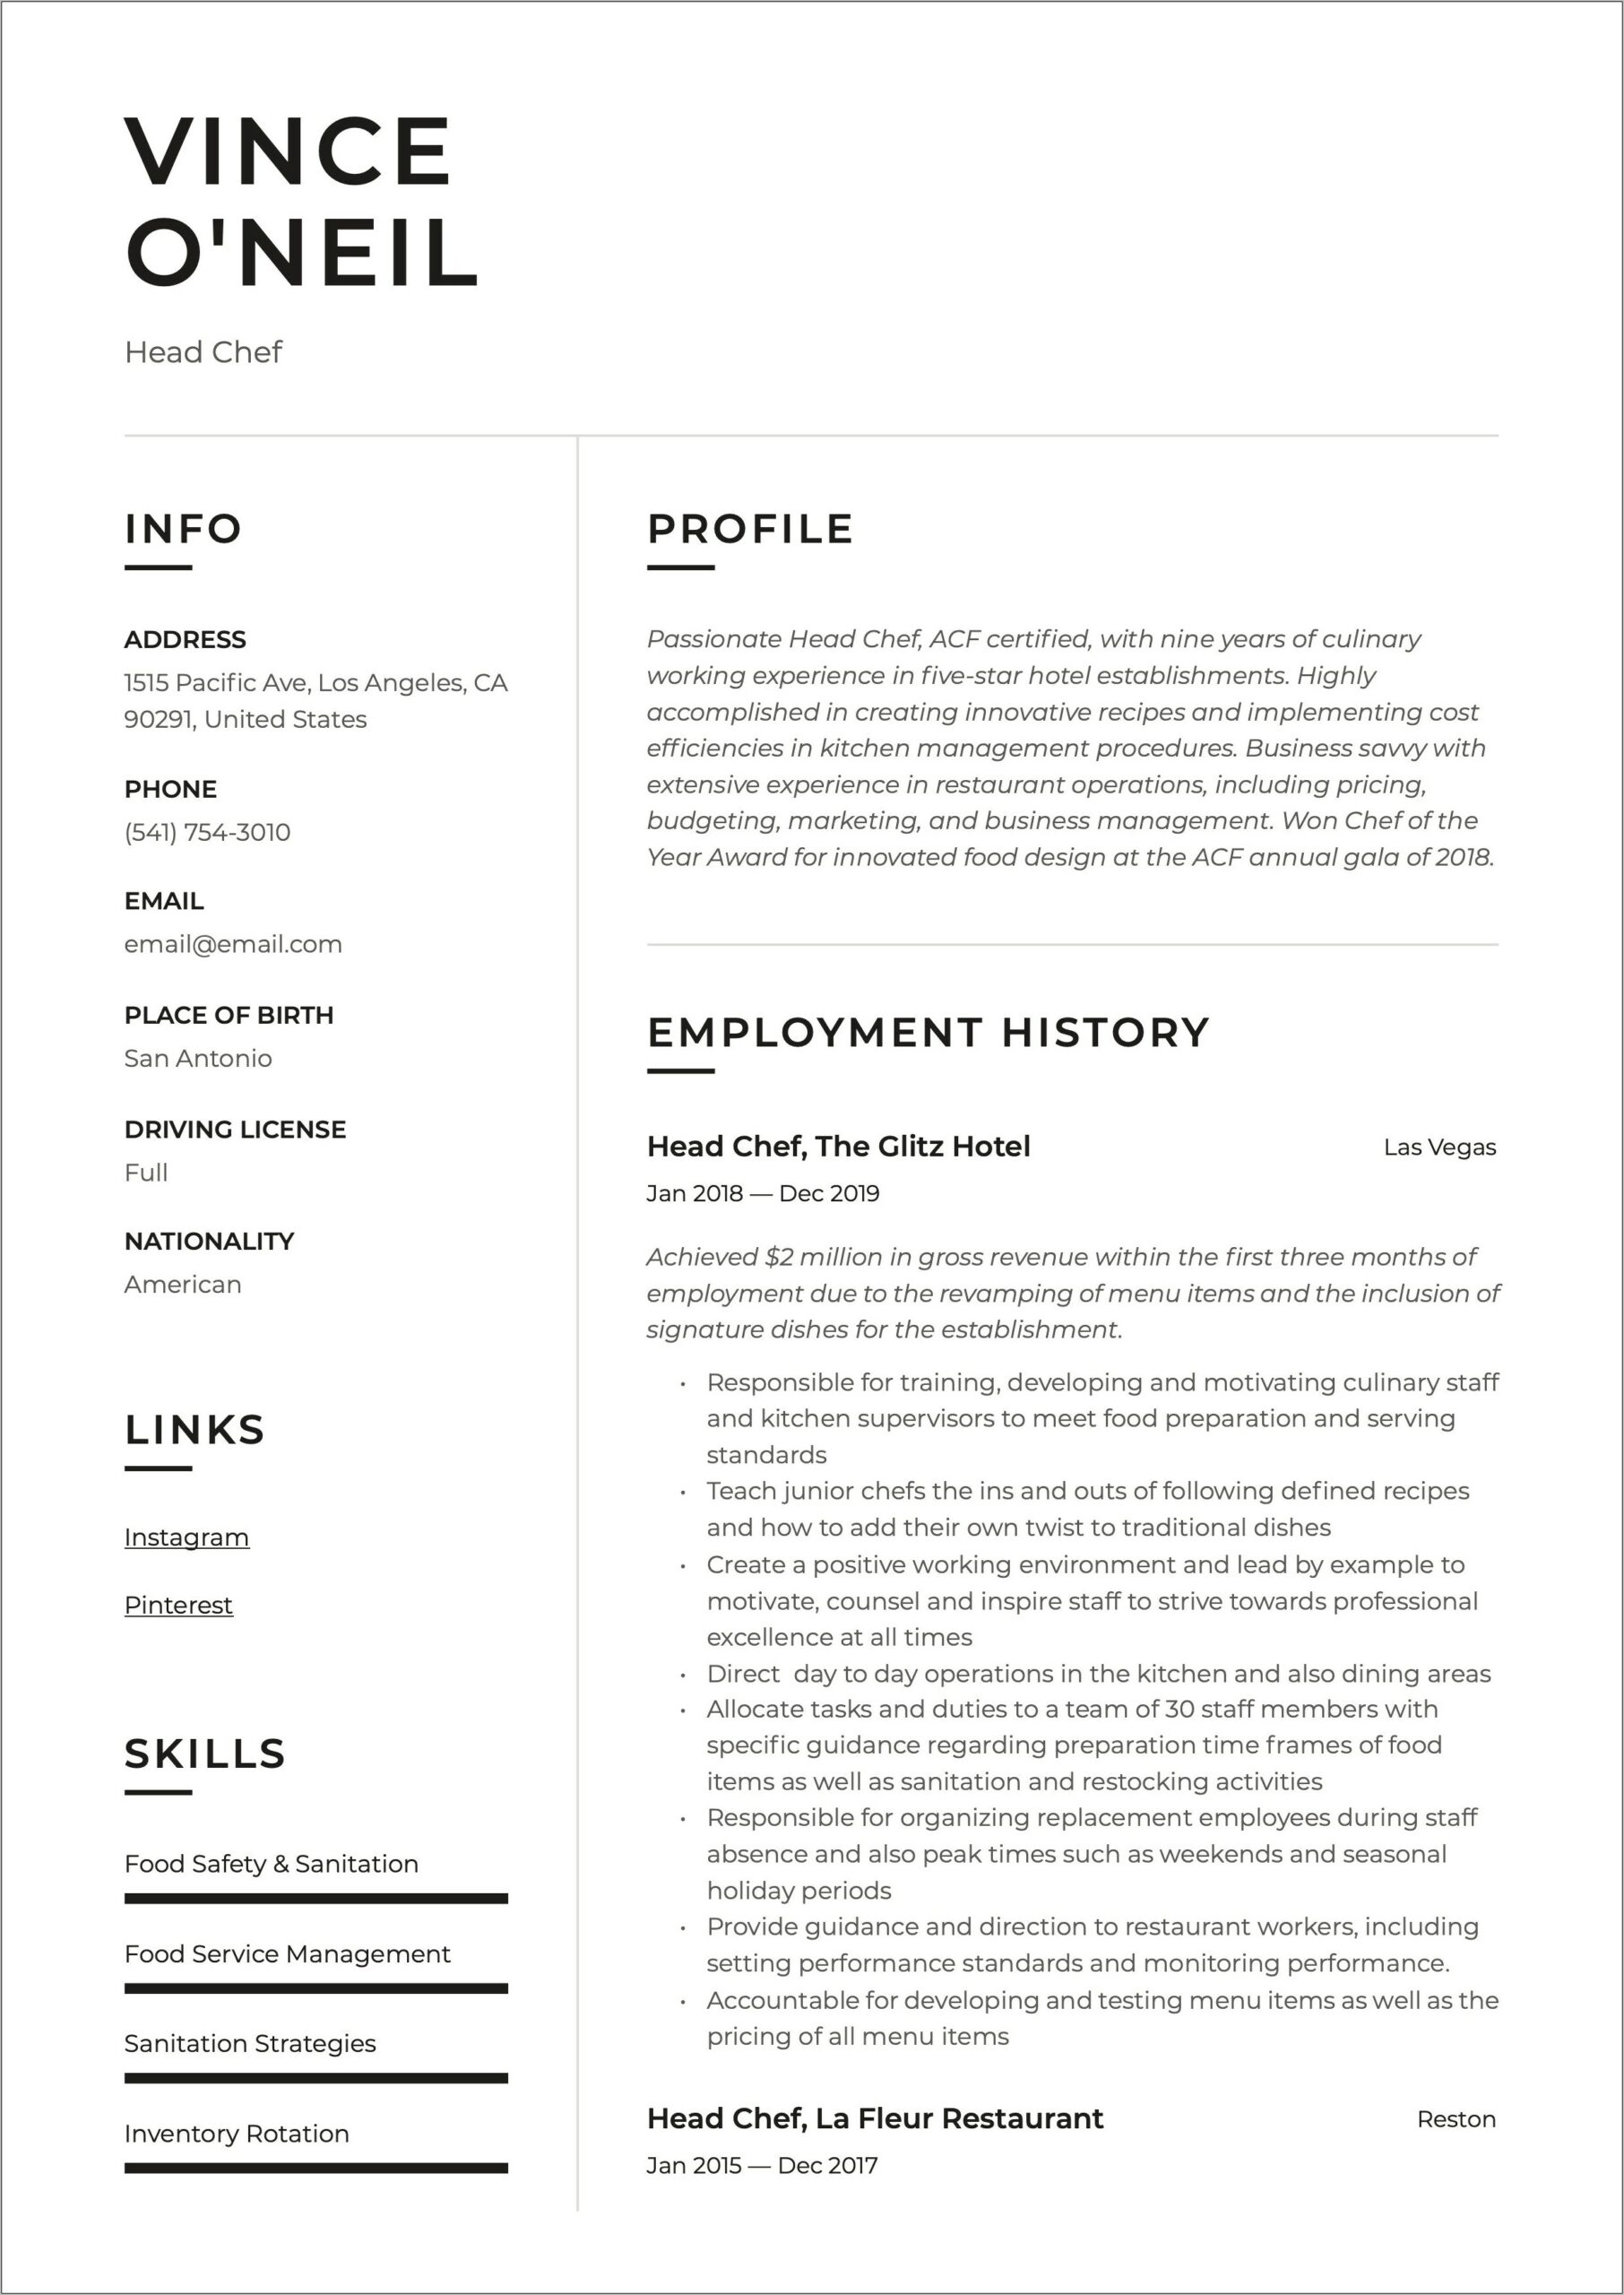 Employment History Resume Sample Download